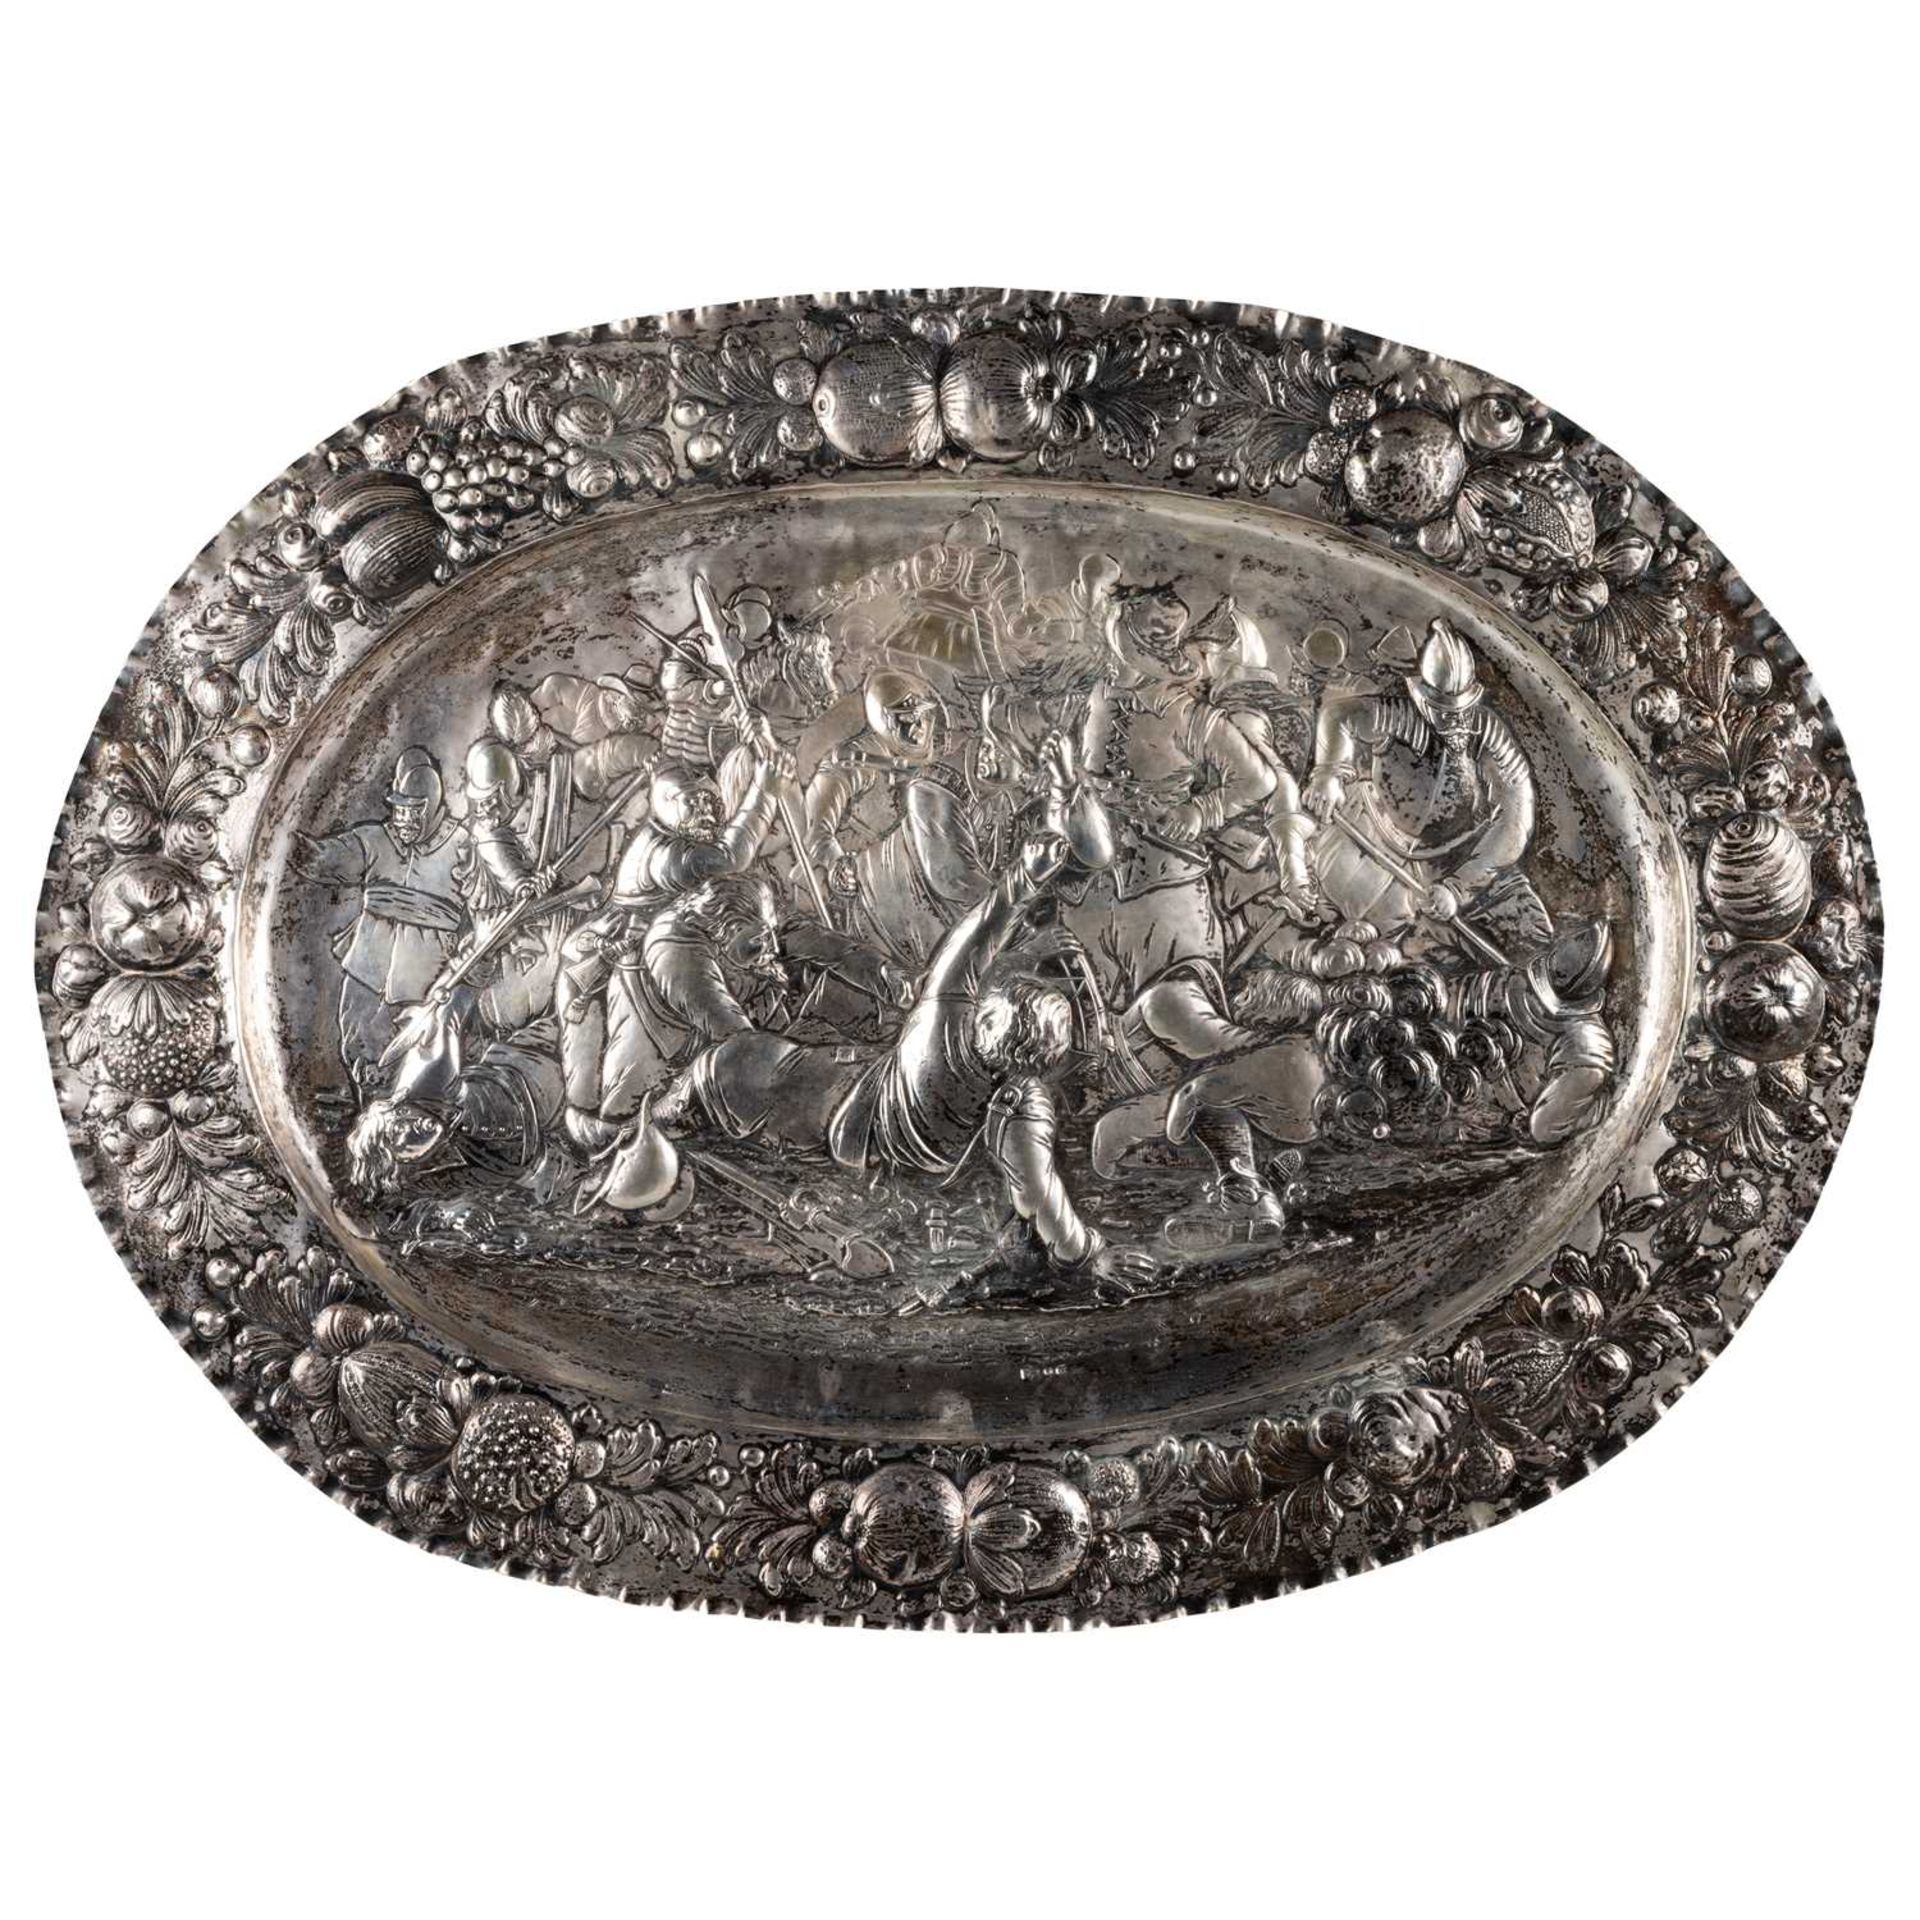 A LARGE GERMAN SILVER CHARGER, EARLY 20TH CENTURY